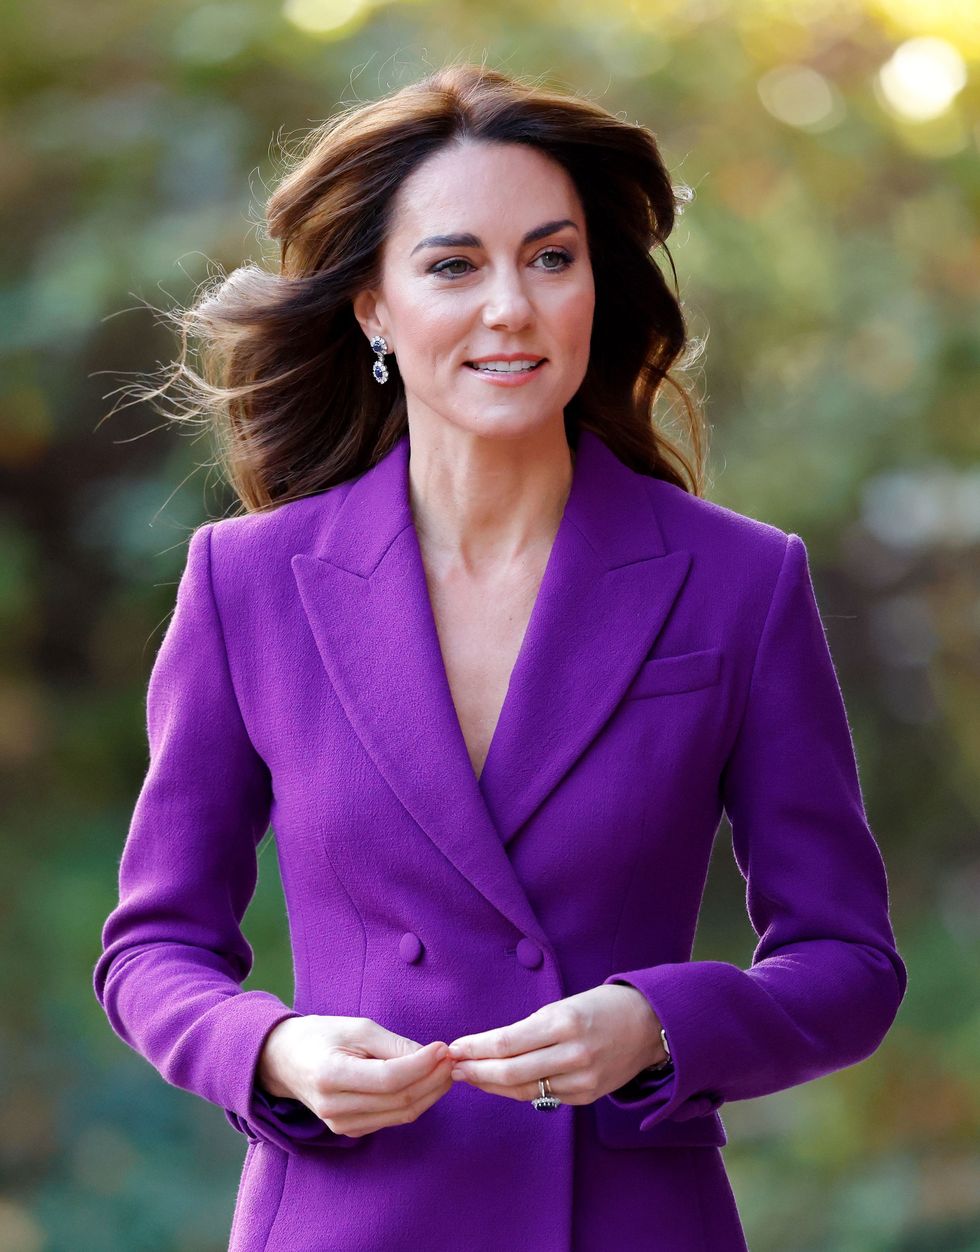 kate-middleton-isn’t-likely-to-be-‘particularly-bothered’-about-<i>the-crown</i>’s-portrayal-of-her